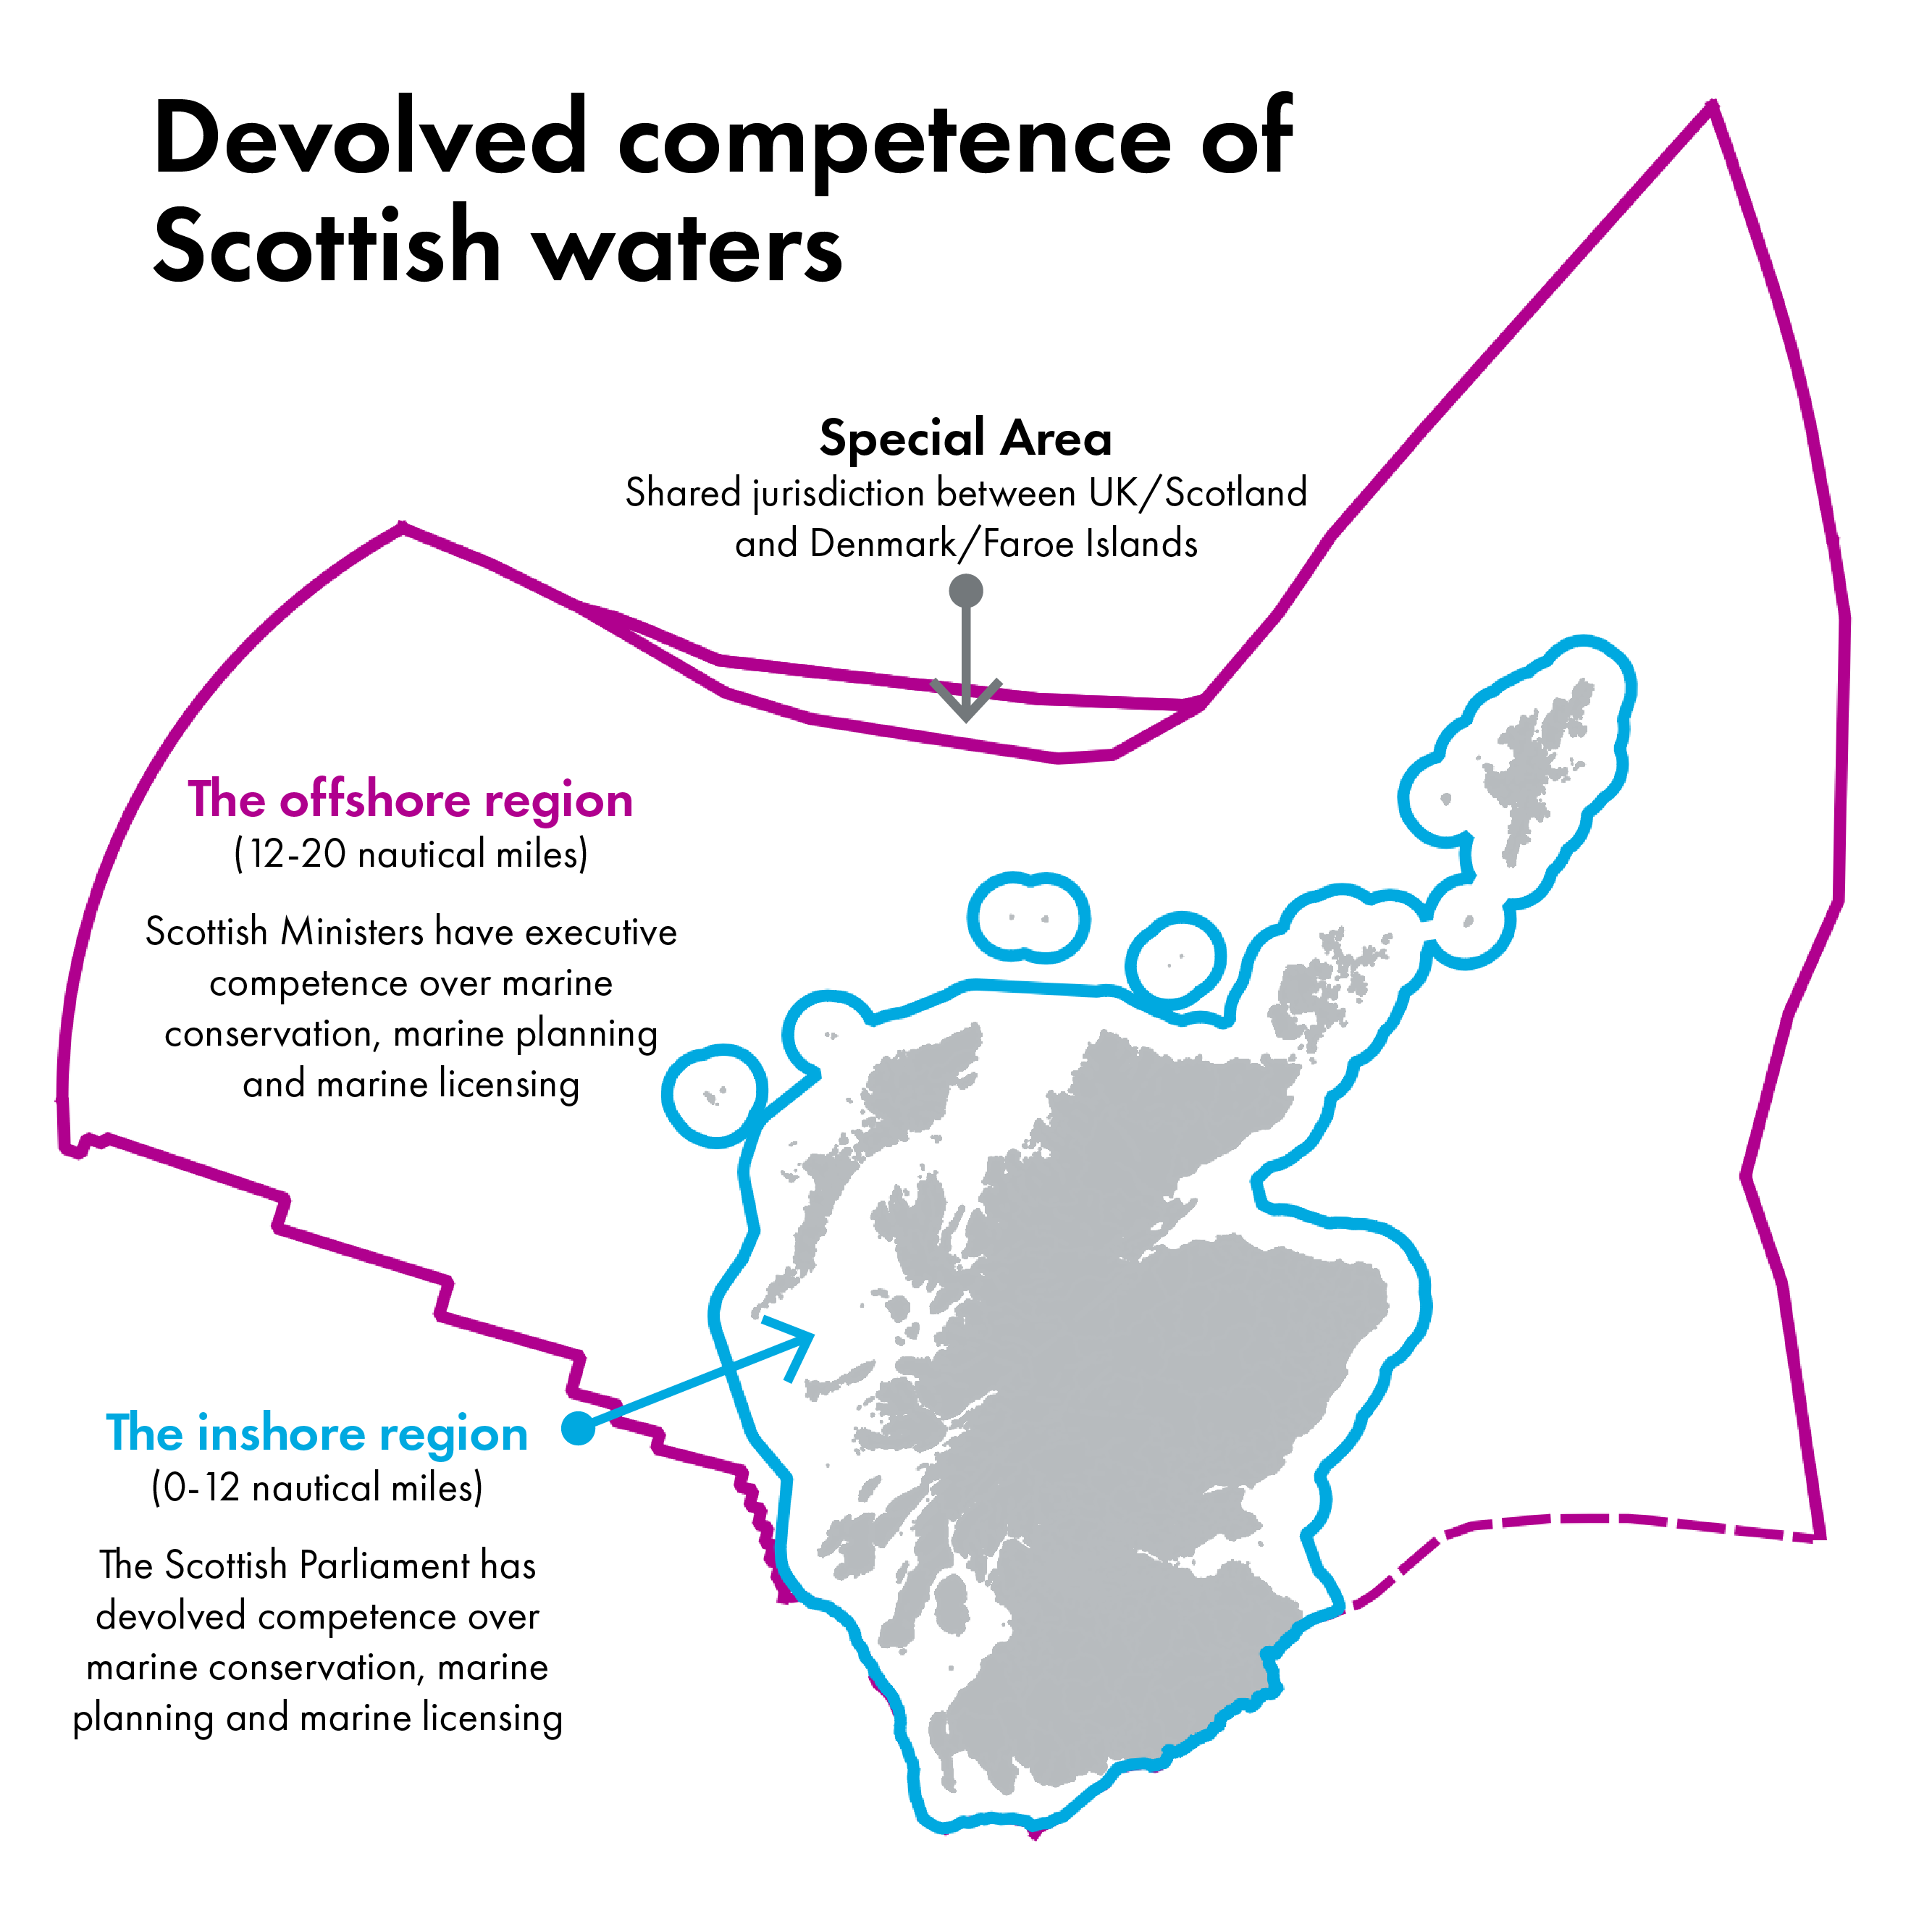 Map showing the boundaries of devolved competence in Scottish waters. The inshore region is the region from 0-12 nautical miles from the shore. Here, the Scottish Parliament has devolved competence over marine conservation, marine planning and marine licensing. The offshore region is the area 12-20 nautical miles from the shore. Here, Scottish Ministers have executive competence over marine conservation, marine planning and marine licensing. The special area, to the north of the mainland and west of Shetland, is an area of shared jurisdiction between the UK and Scotland and Denmark and the Faroe Islands.